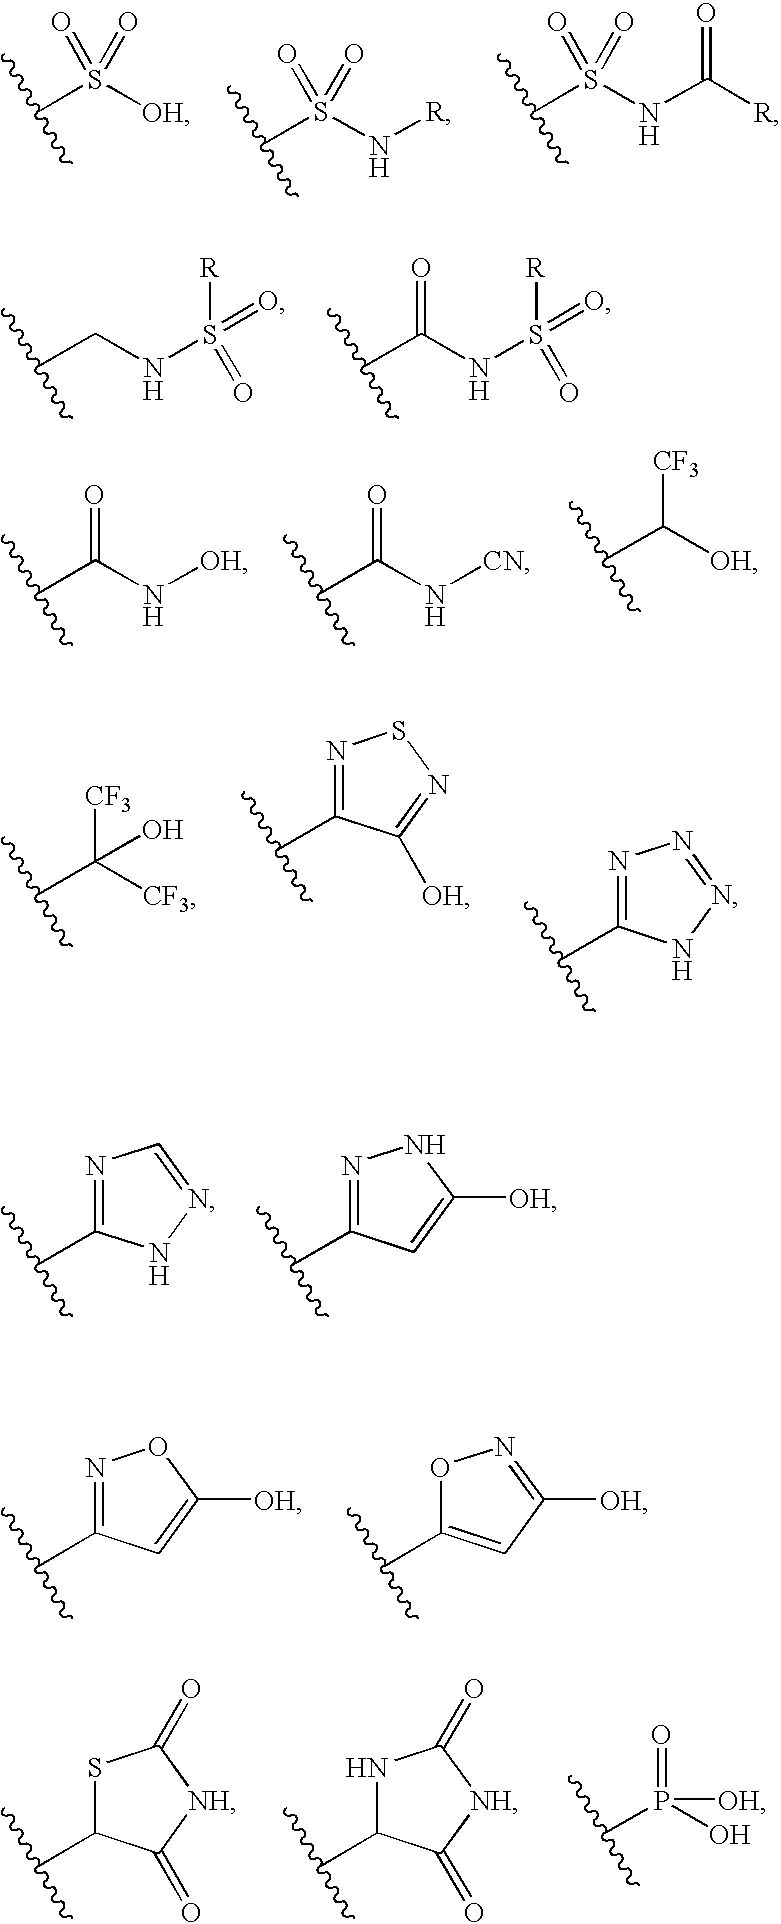 Diaza heterocyclic amide compounds and their uses